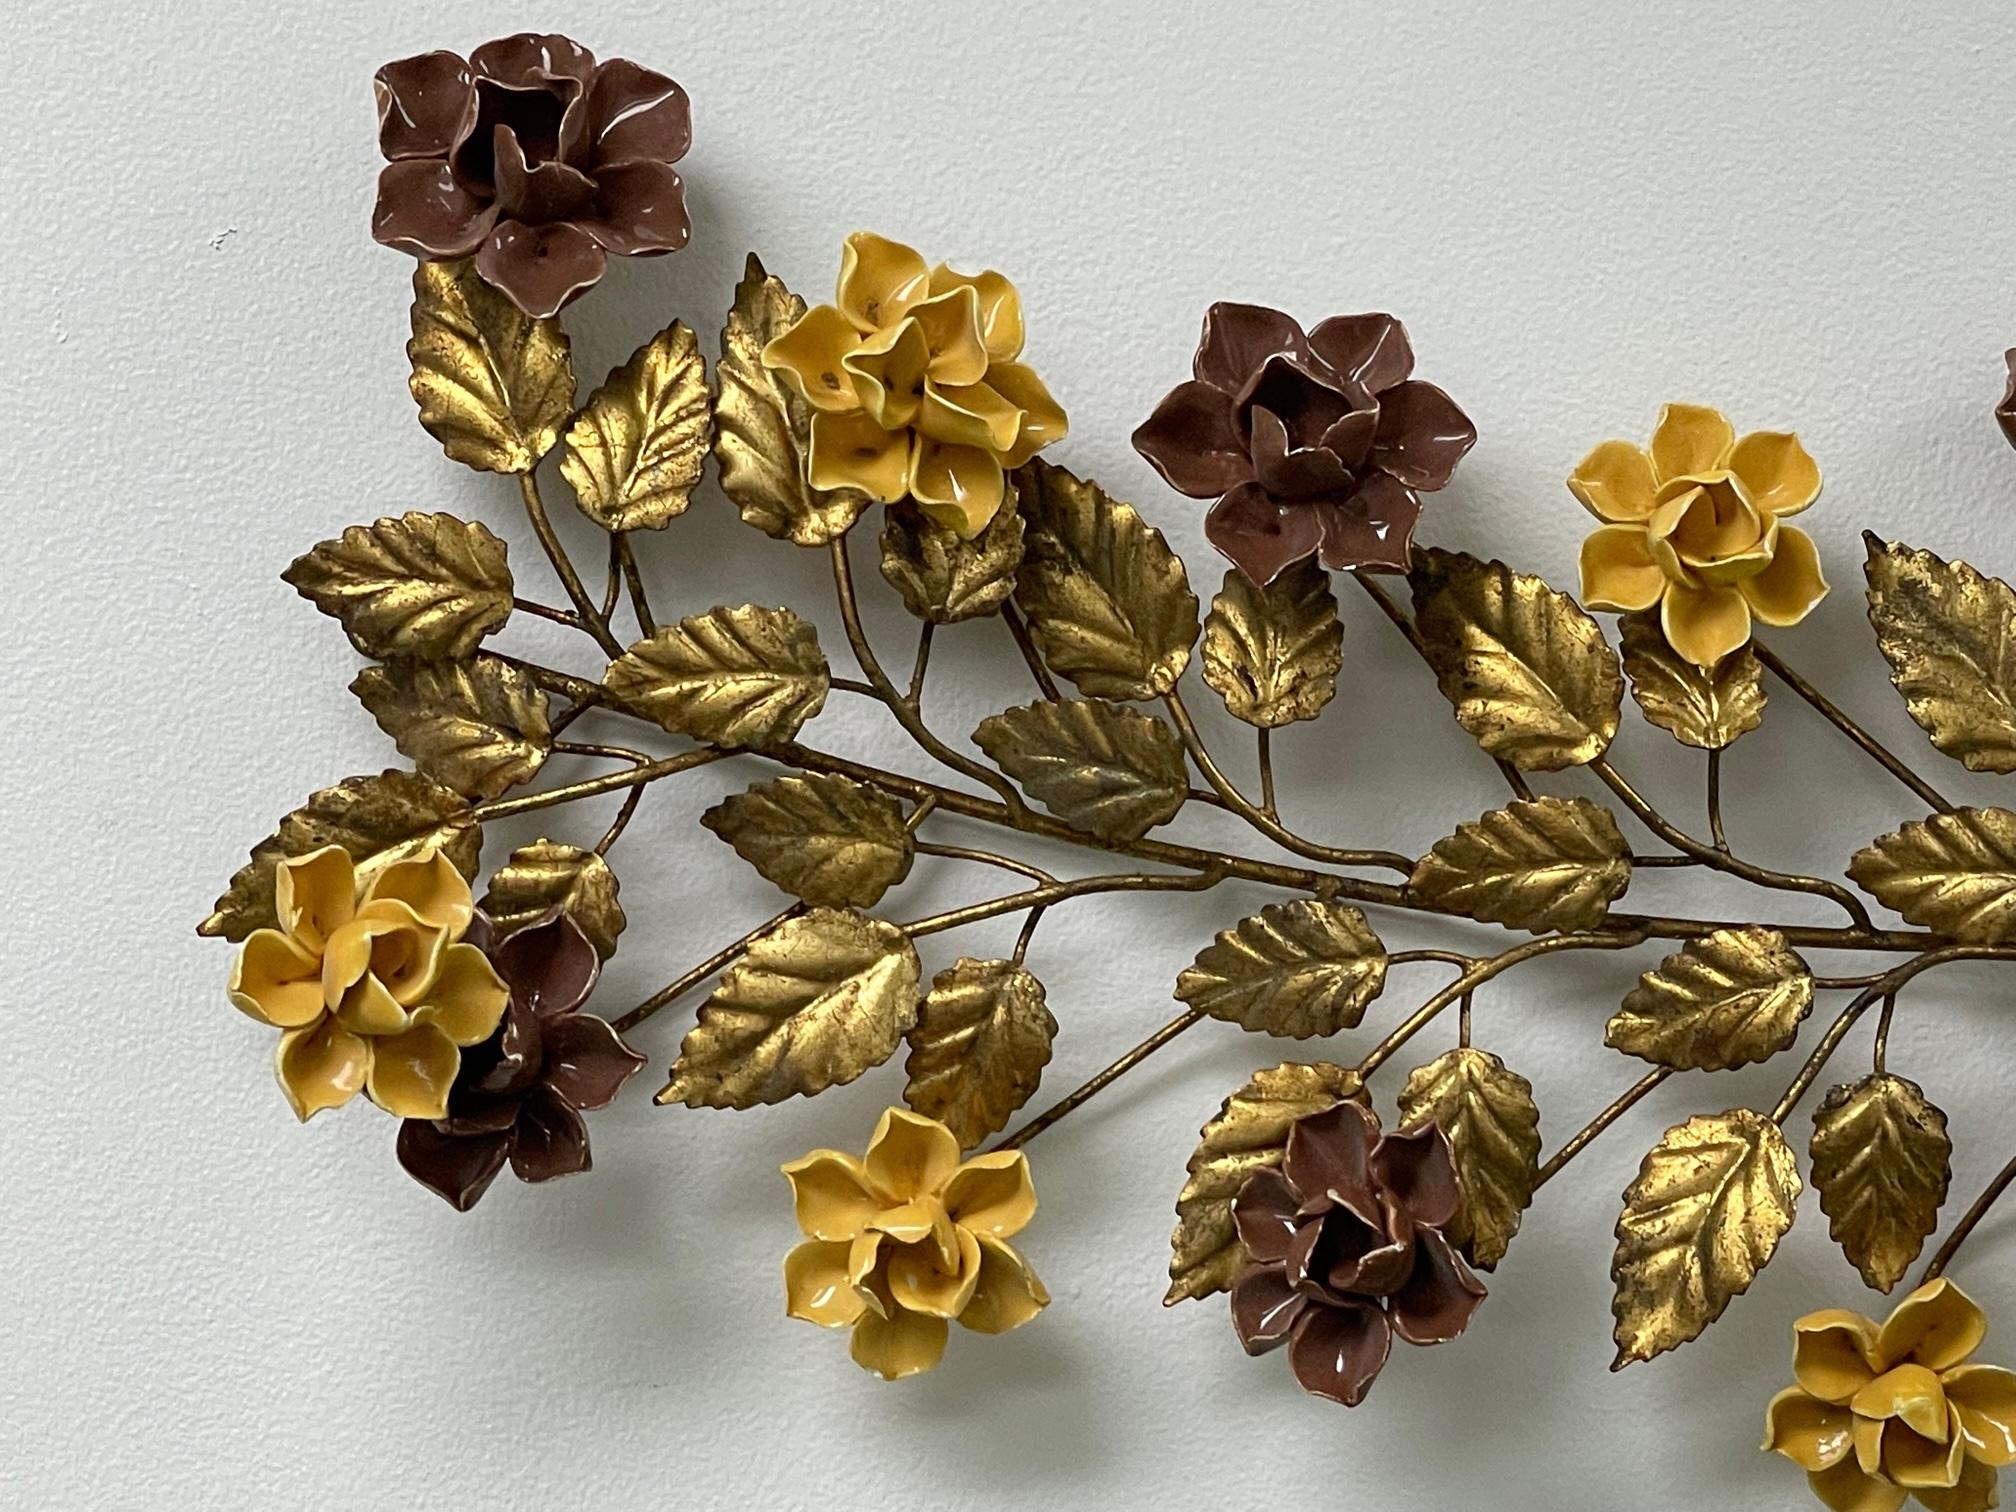 Mid-century Florentine toleware wall sculpture features a vine of gold leaves with ceramic roses in gold and brown. Made in Italy tag present. Good condition with minor imperfections consistent with age (see photos).